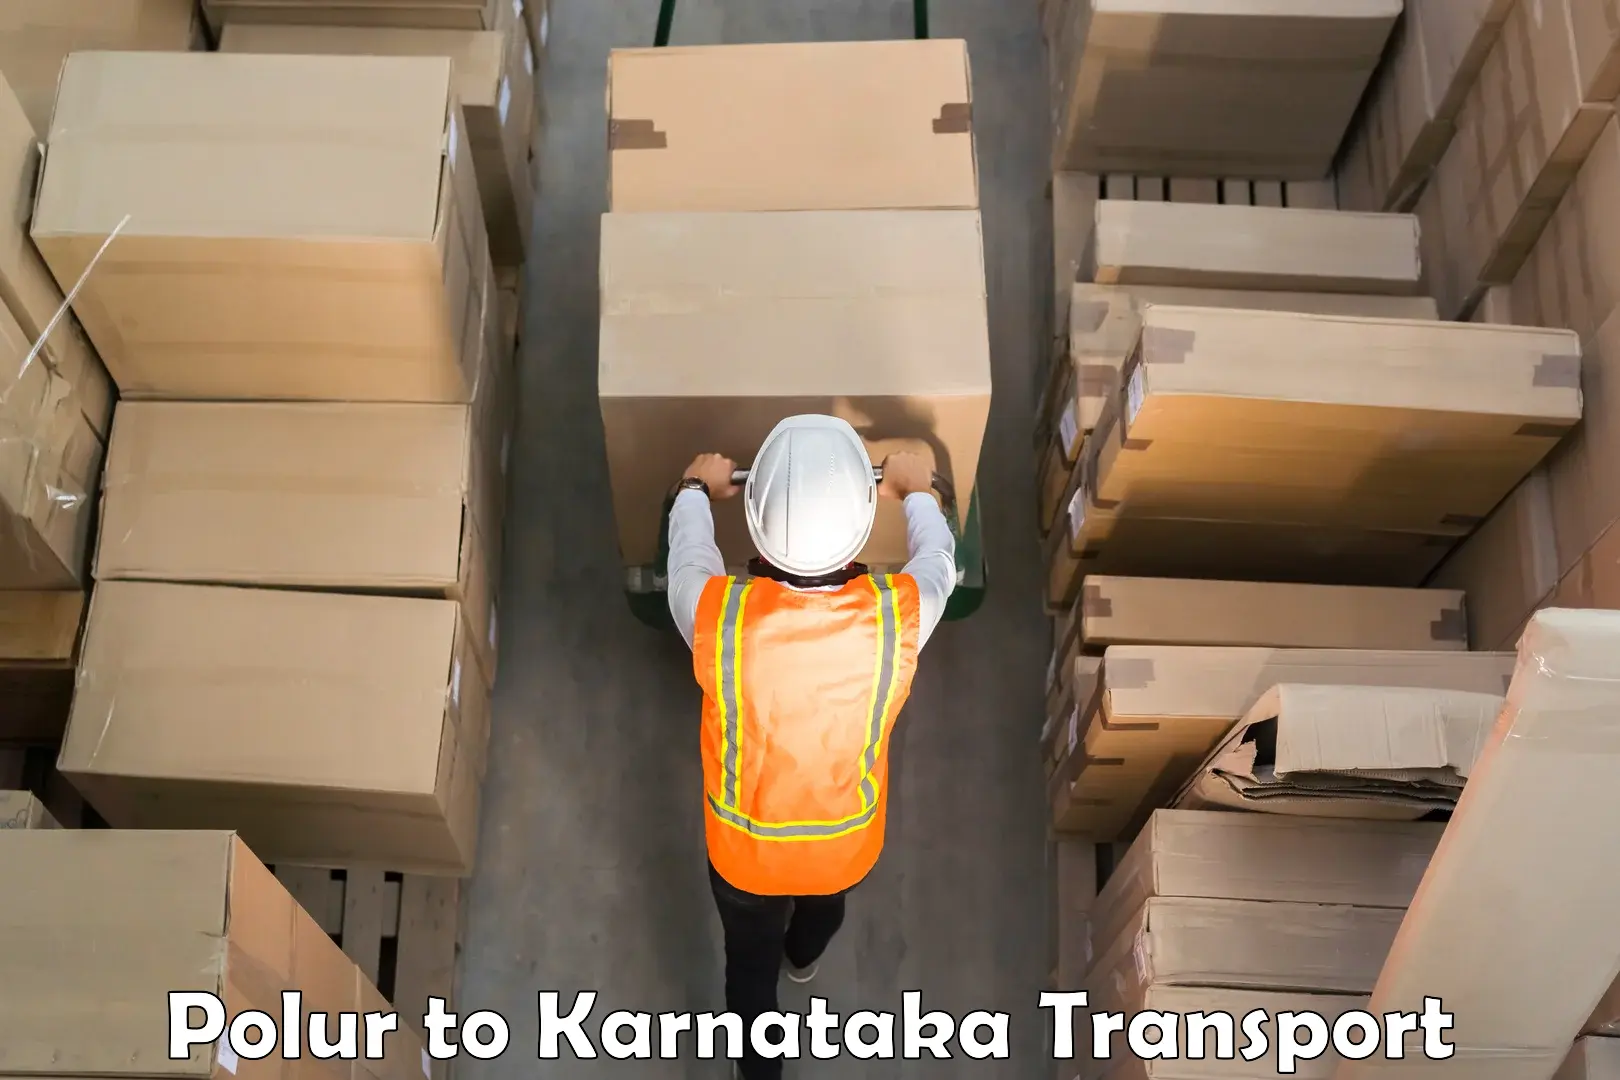 Truck transport companies in India Polur to Chikkamagalur